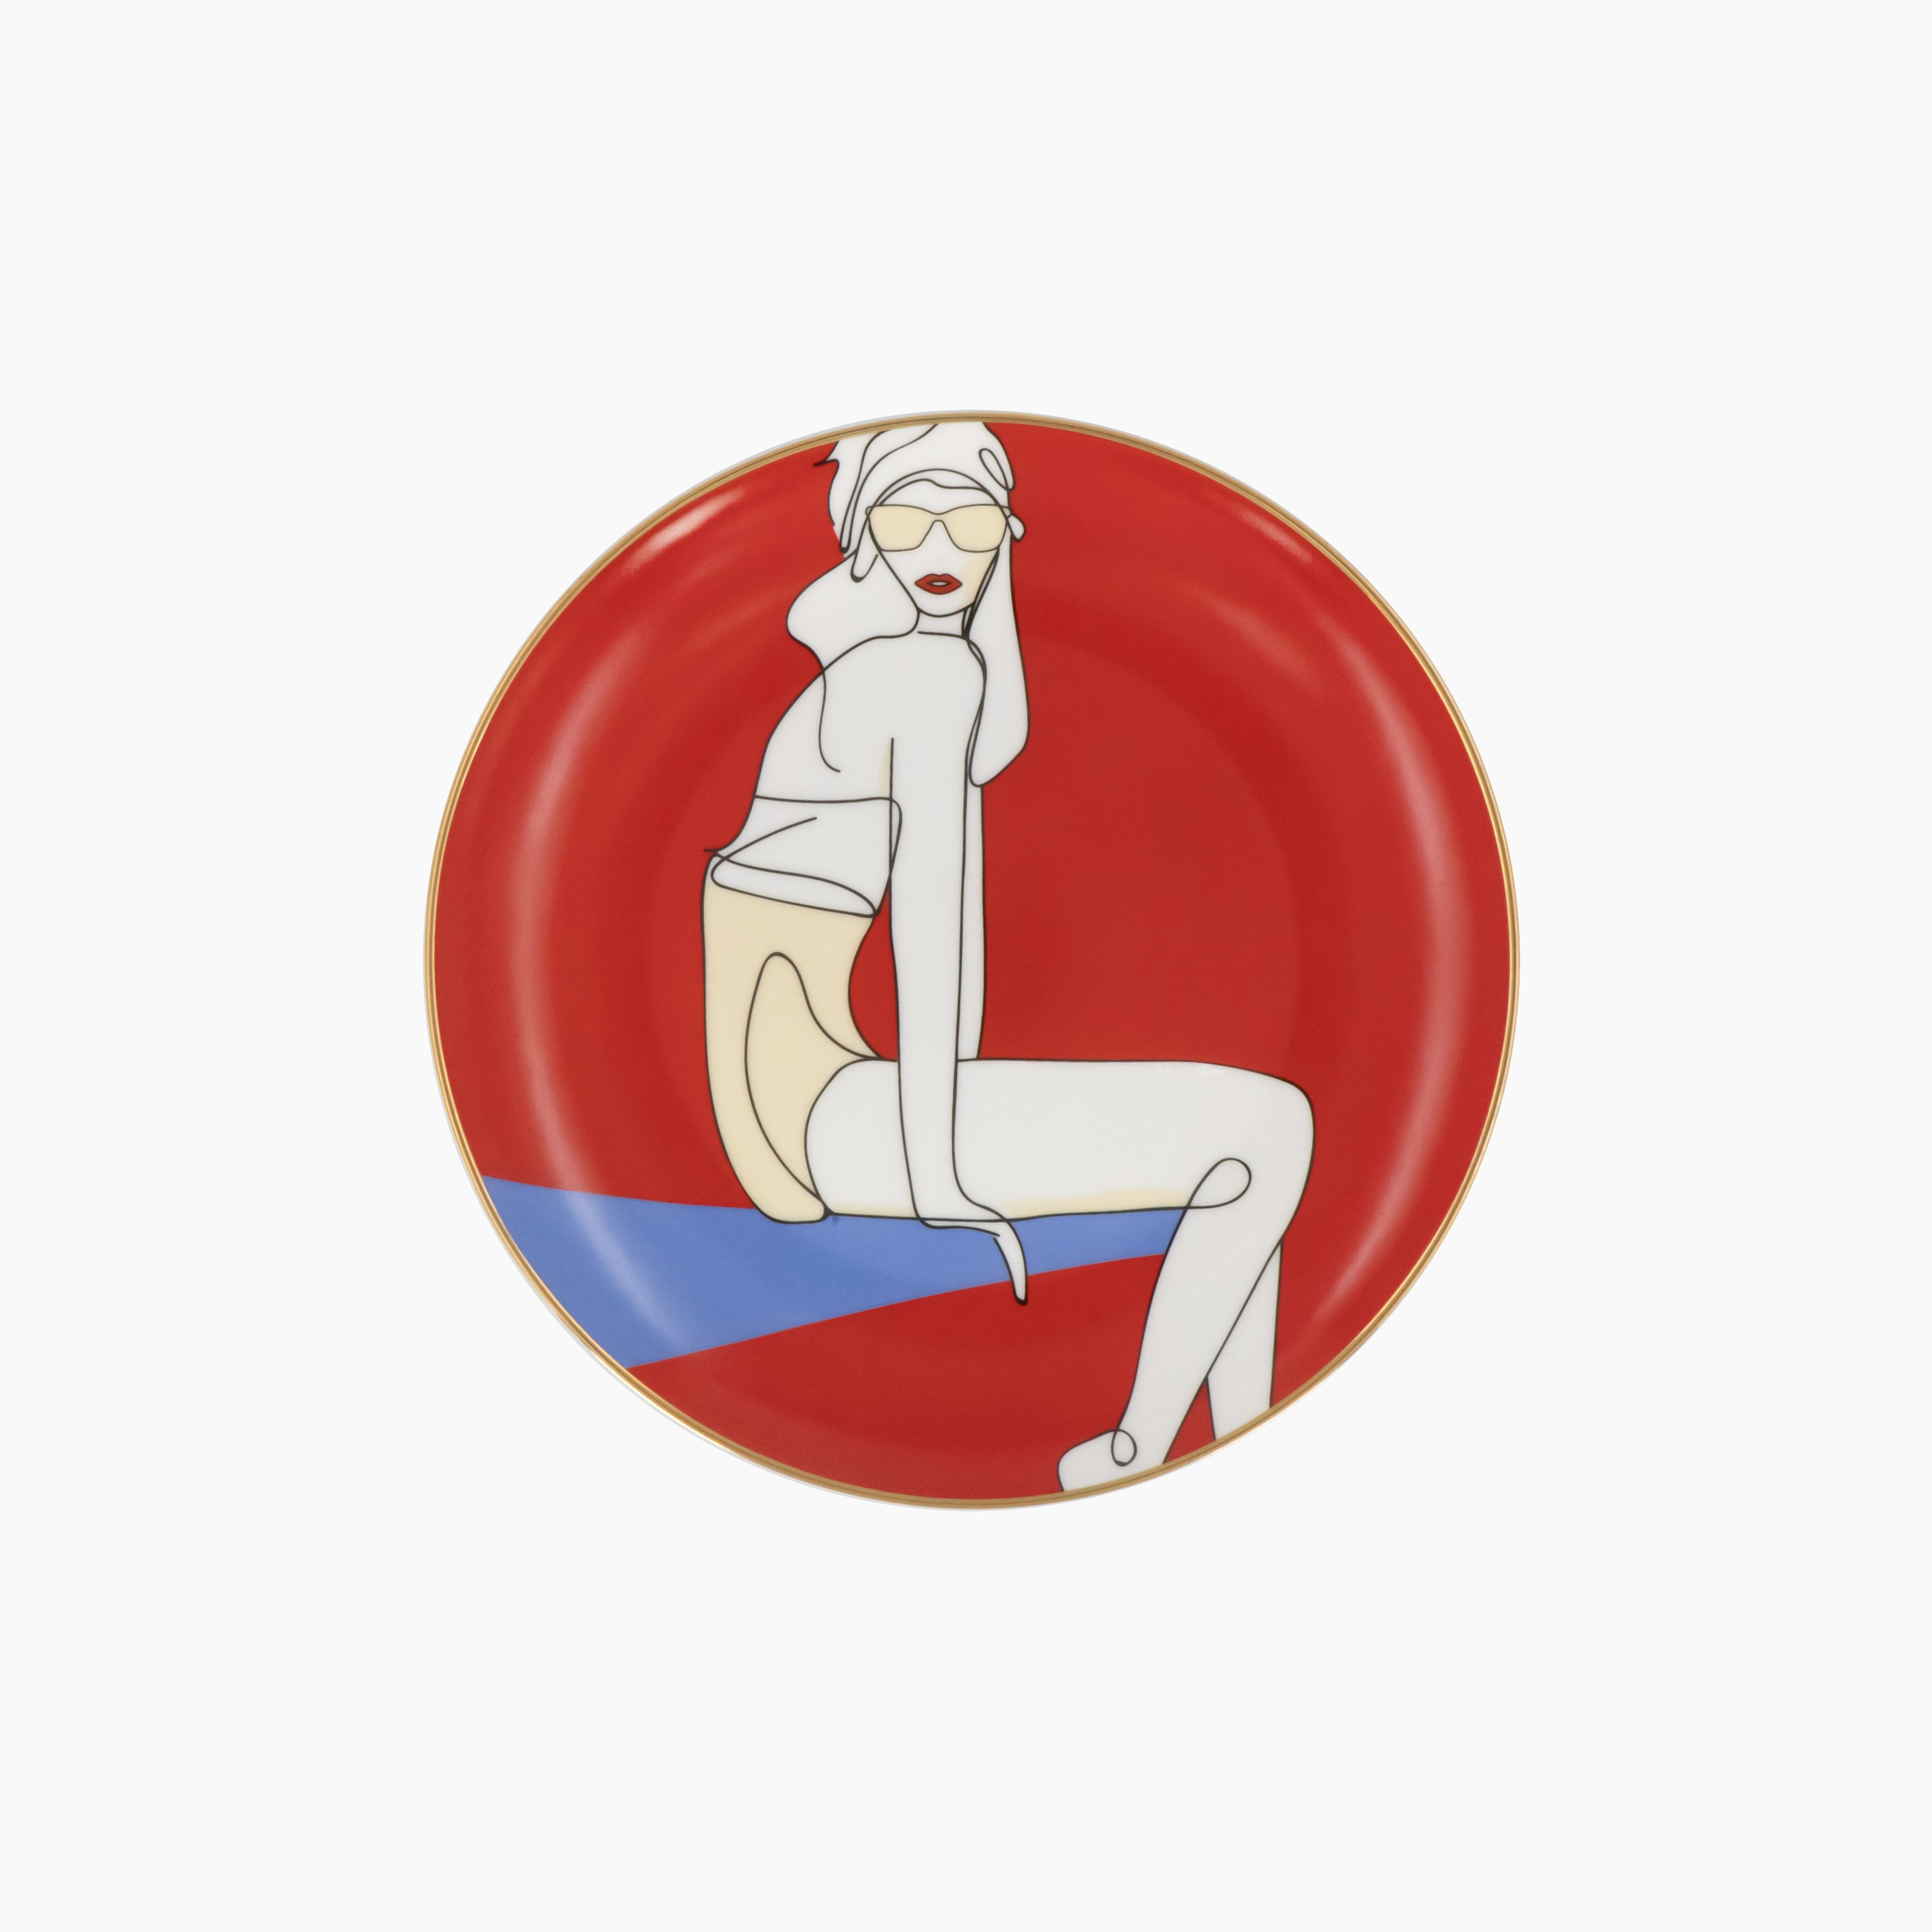 Red Salad Plate with 24K Gold rim with an image of a confident girl sitting on a ledge.